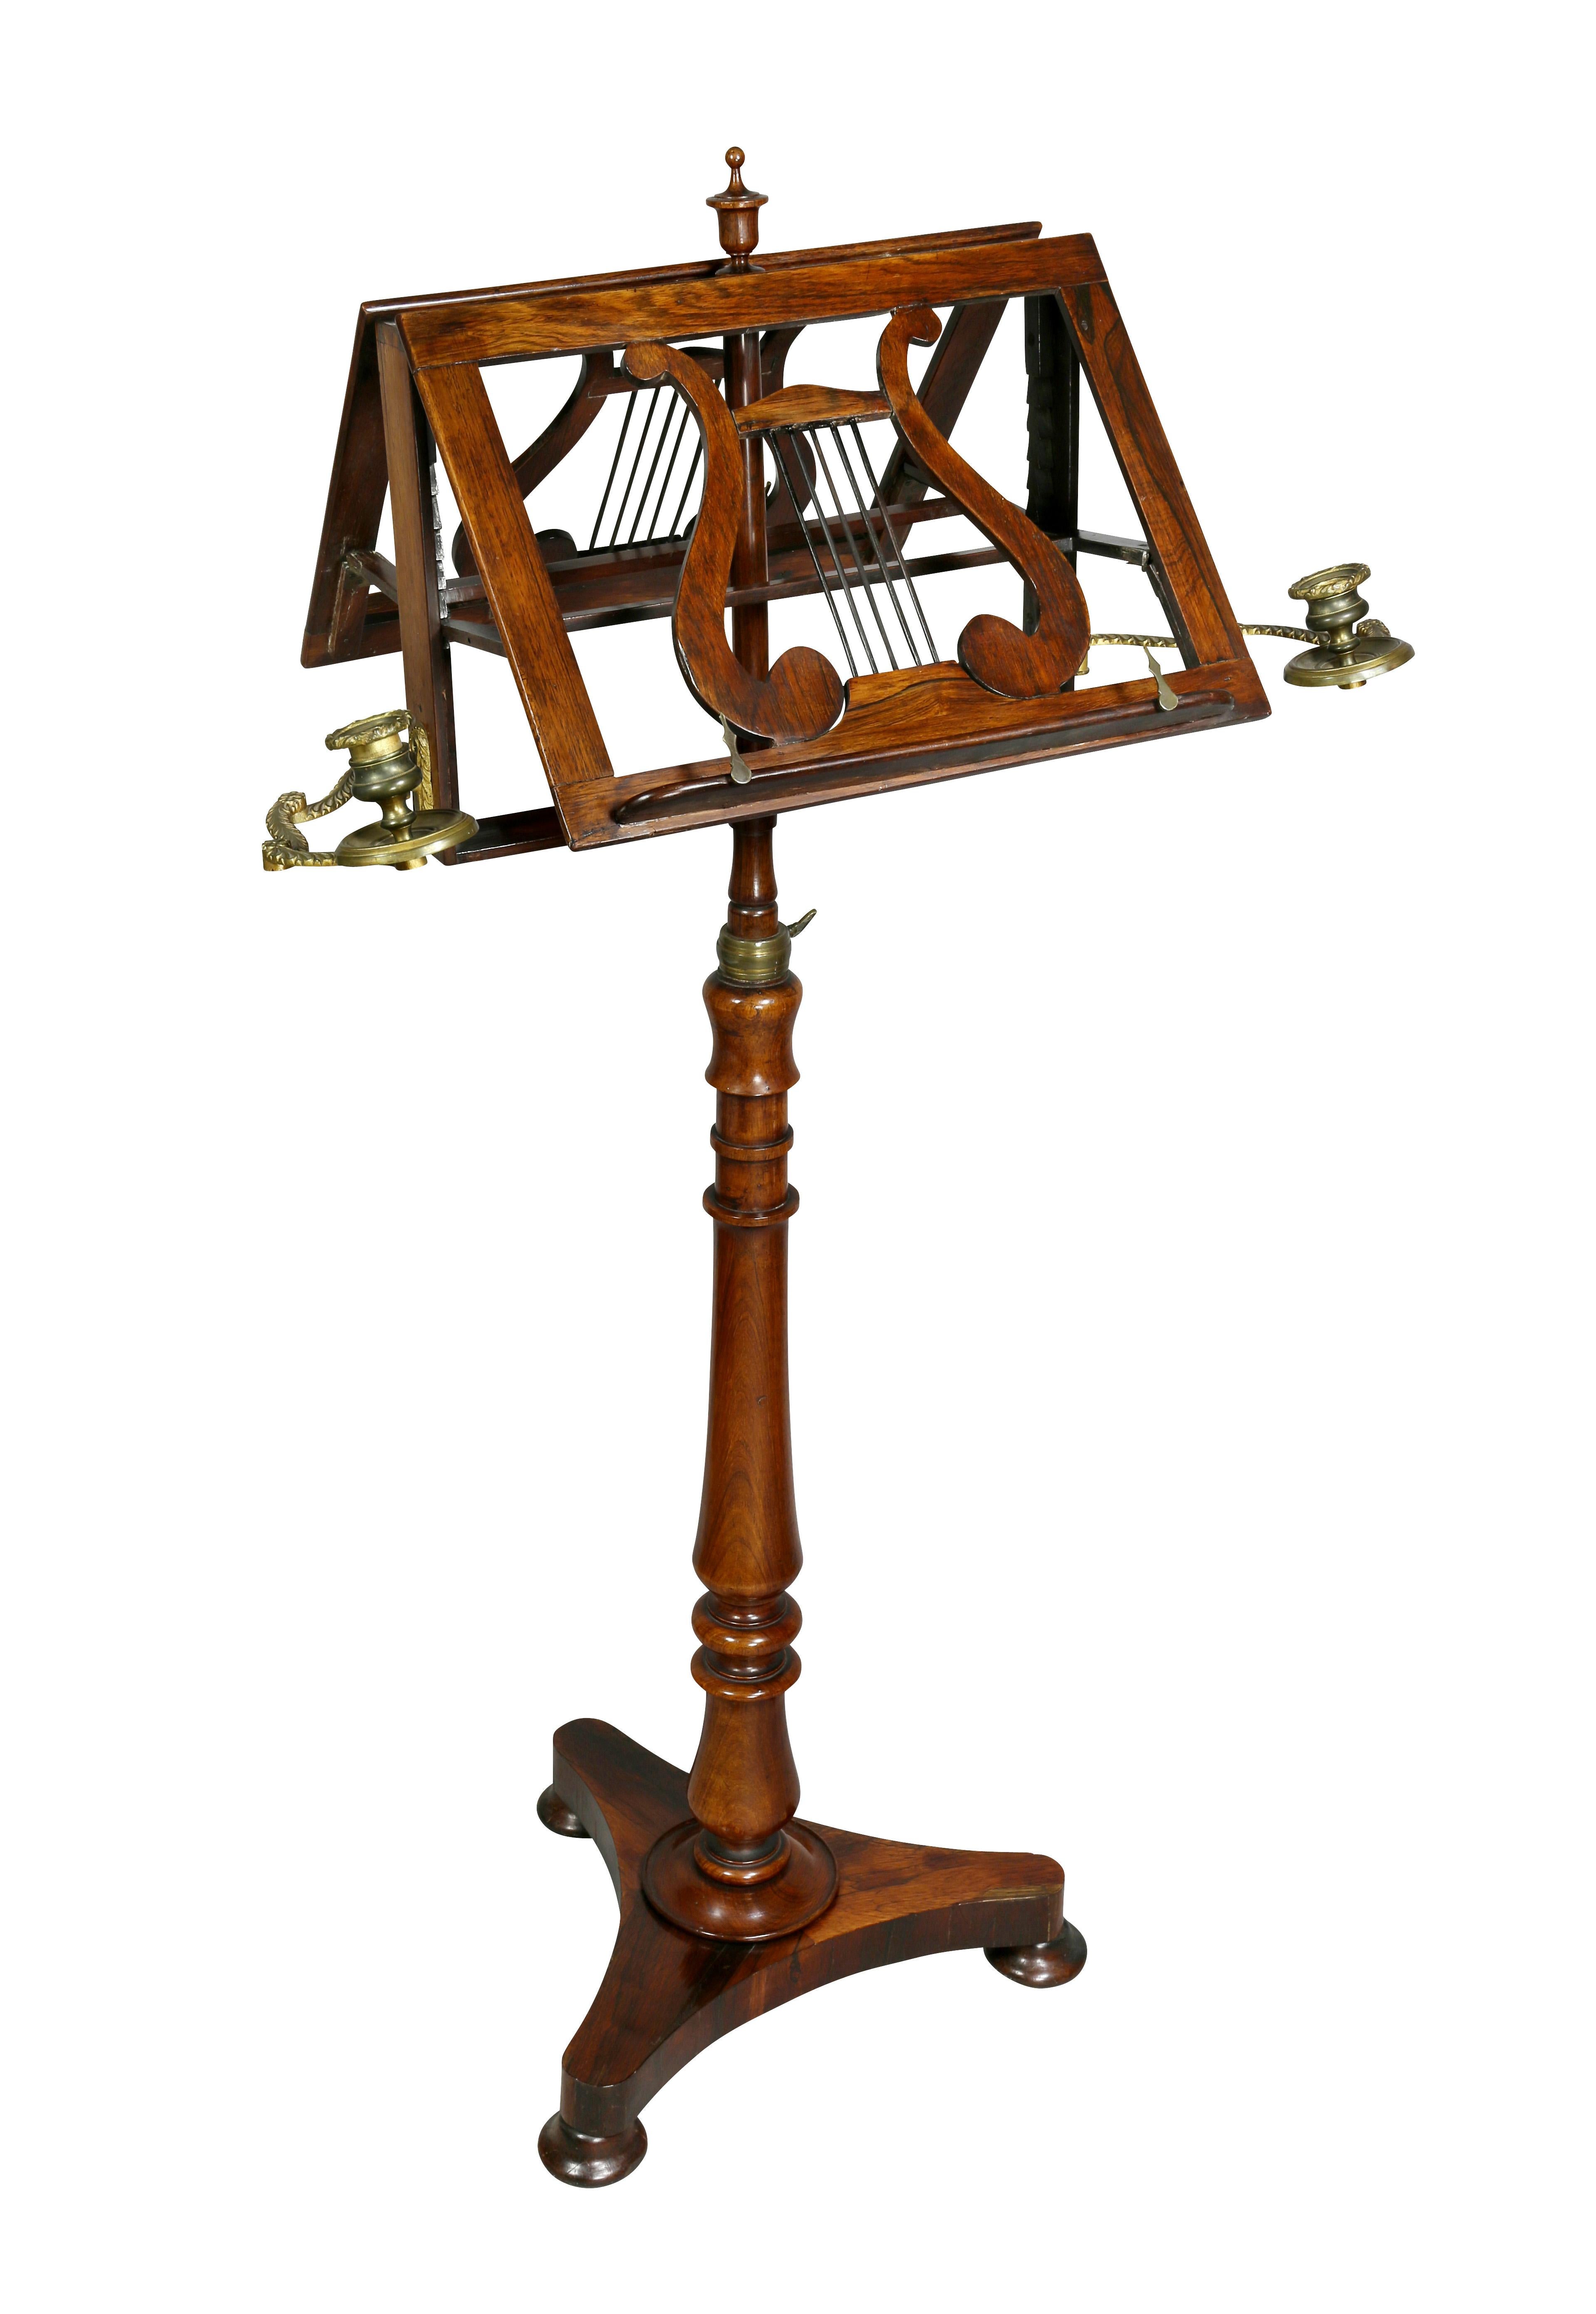 With urn finial over a double sided Lyre form sheet music or book holder, with pair brass adjustable candlearms, turned support ending on tripartite base and flattened circular feet.